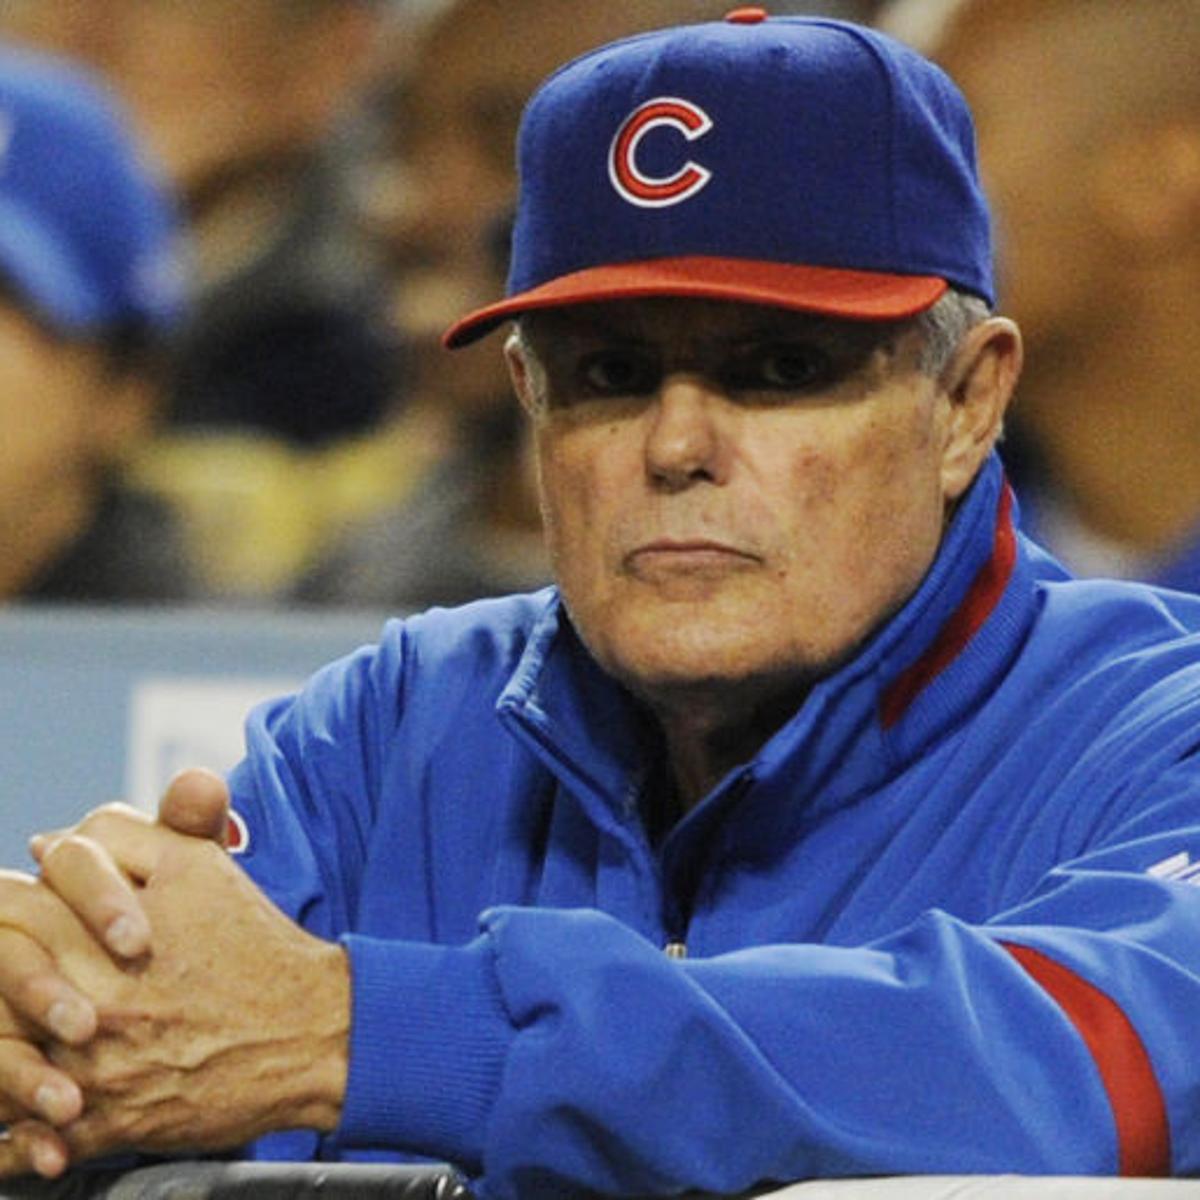 Lou Piniella Hired by Reds as Senior Advisor: Latest Comments